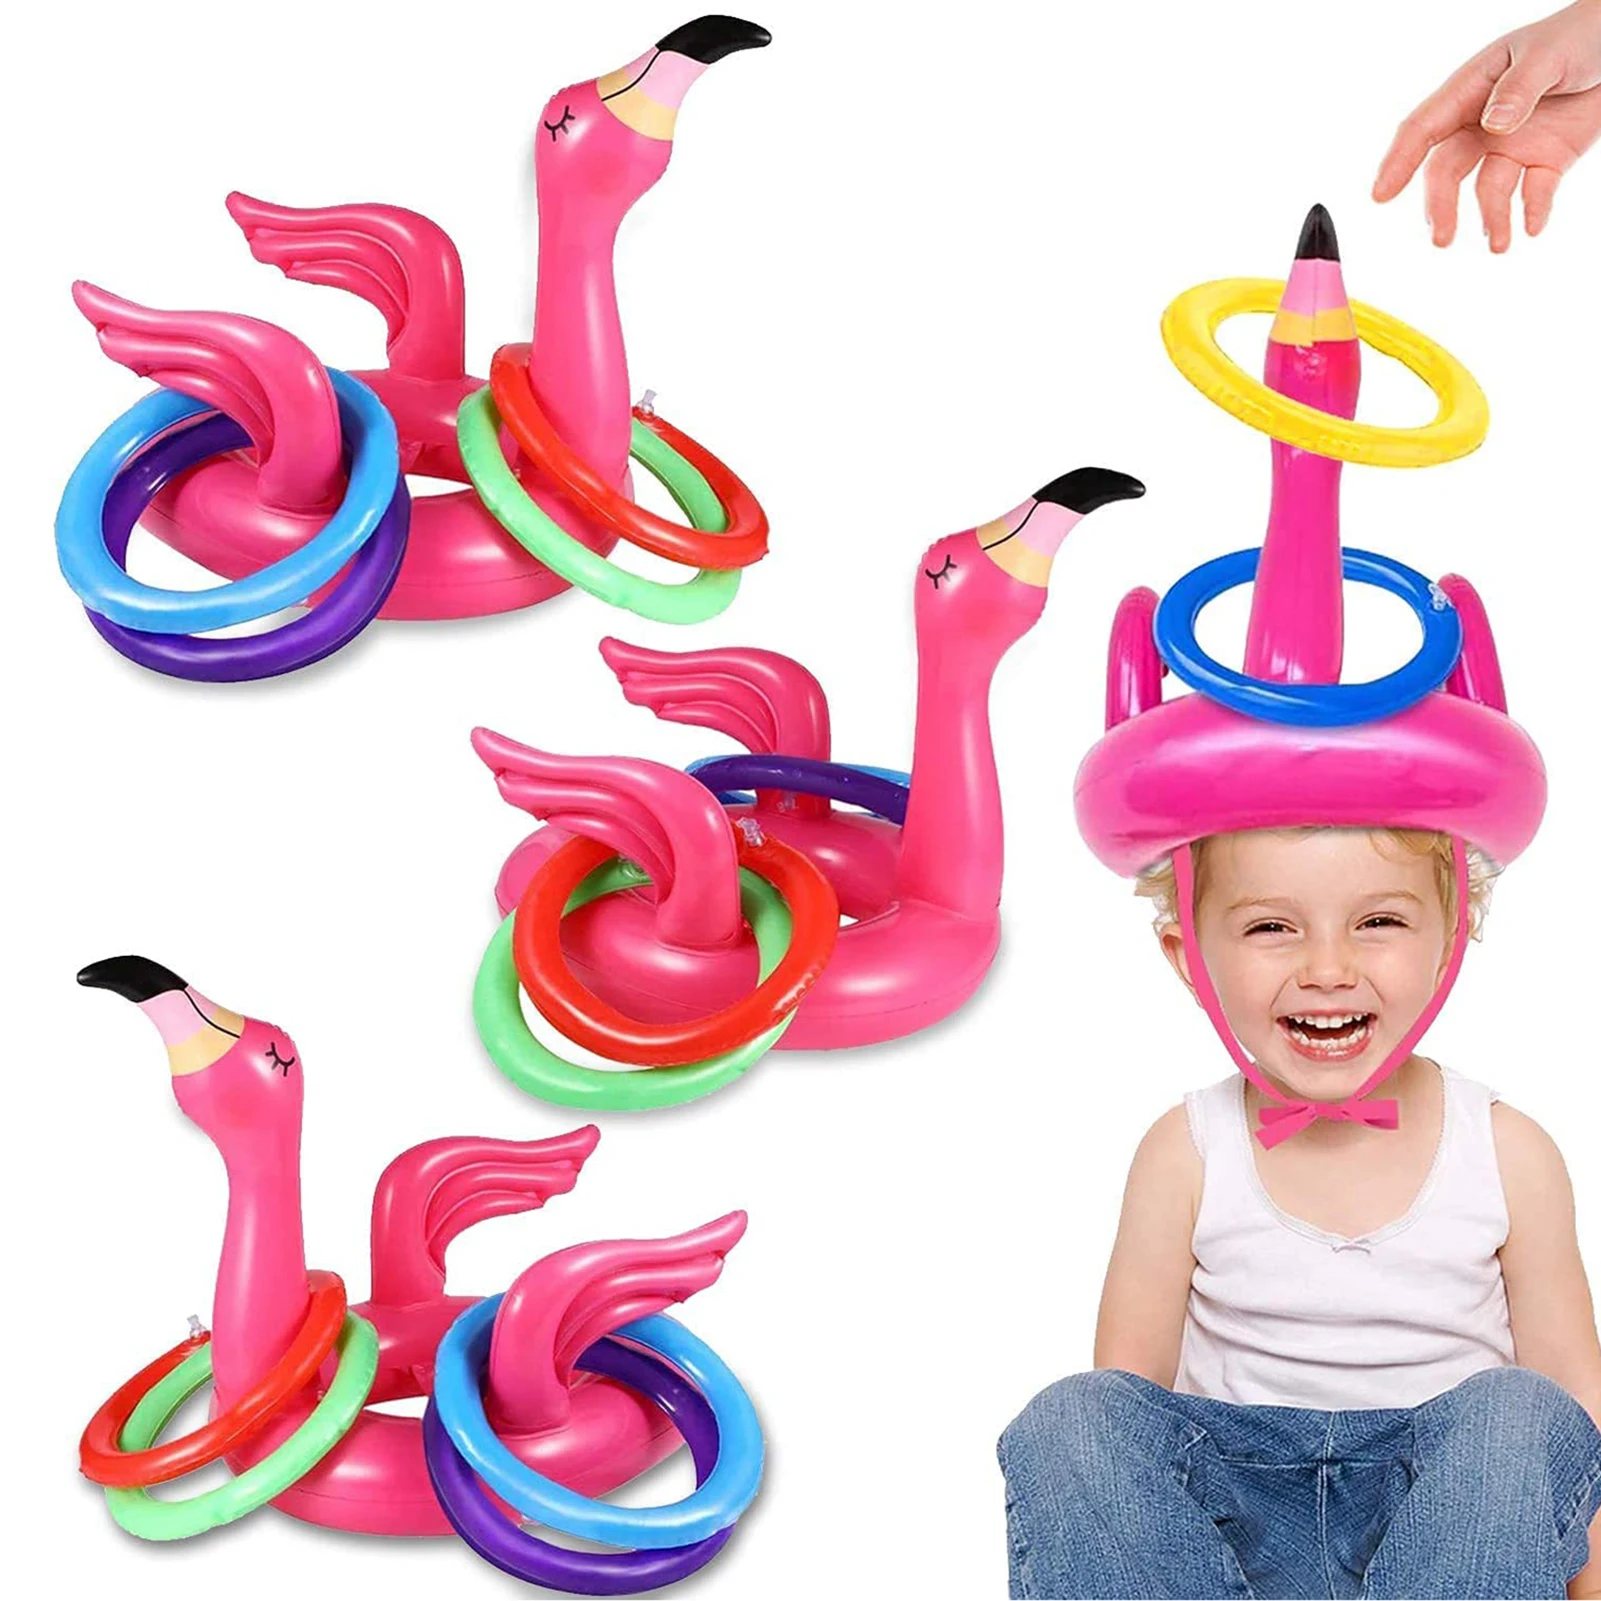 Portable Iatable Flamingo Head Hat With 4Pcs Toss Rings Water Game For Family Party Pink PVC Material Outdoor Pools Fun Toys jewelry box necklace bracelet rings cardboard packaging display box gifts jewelry storage organizer holder with sponge inside